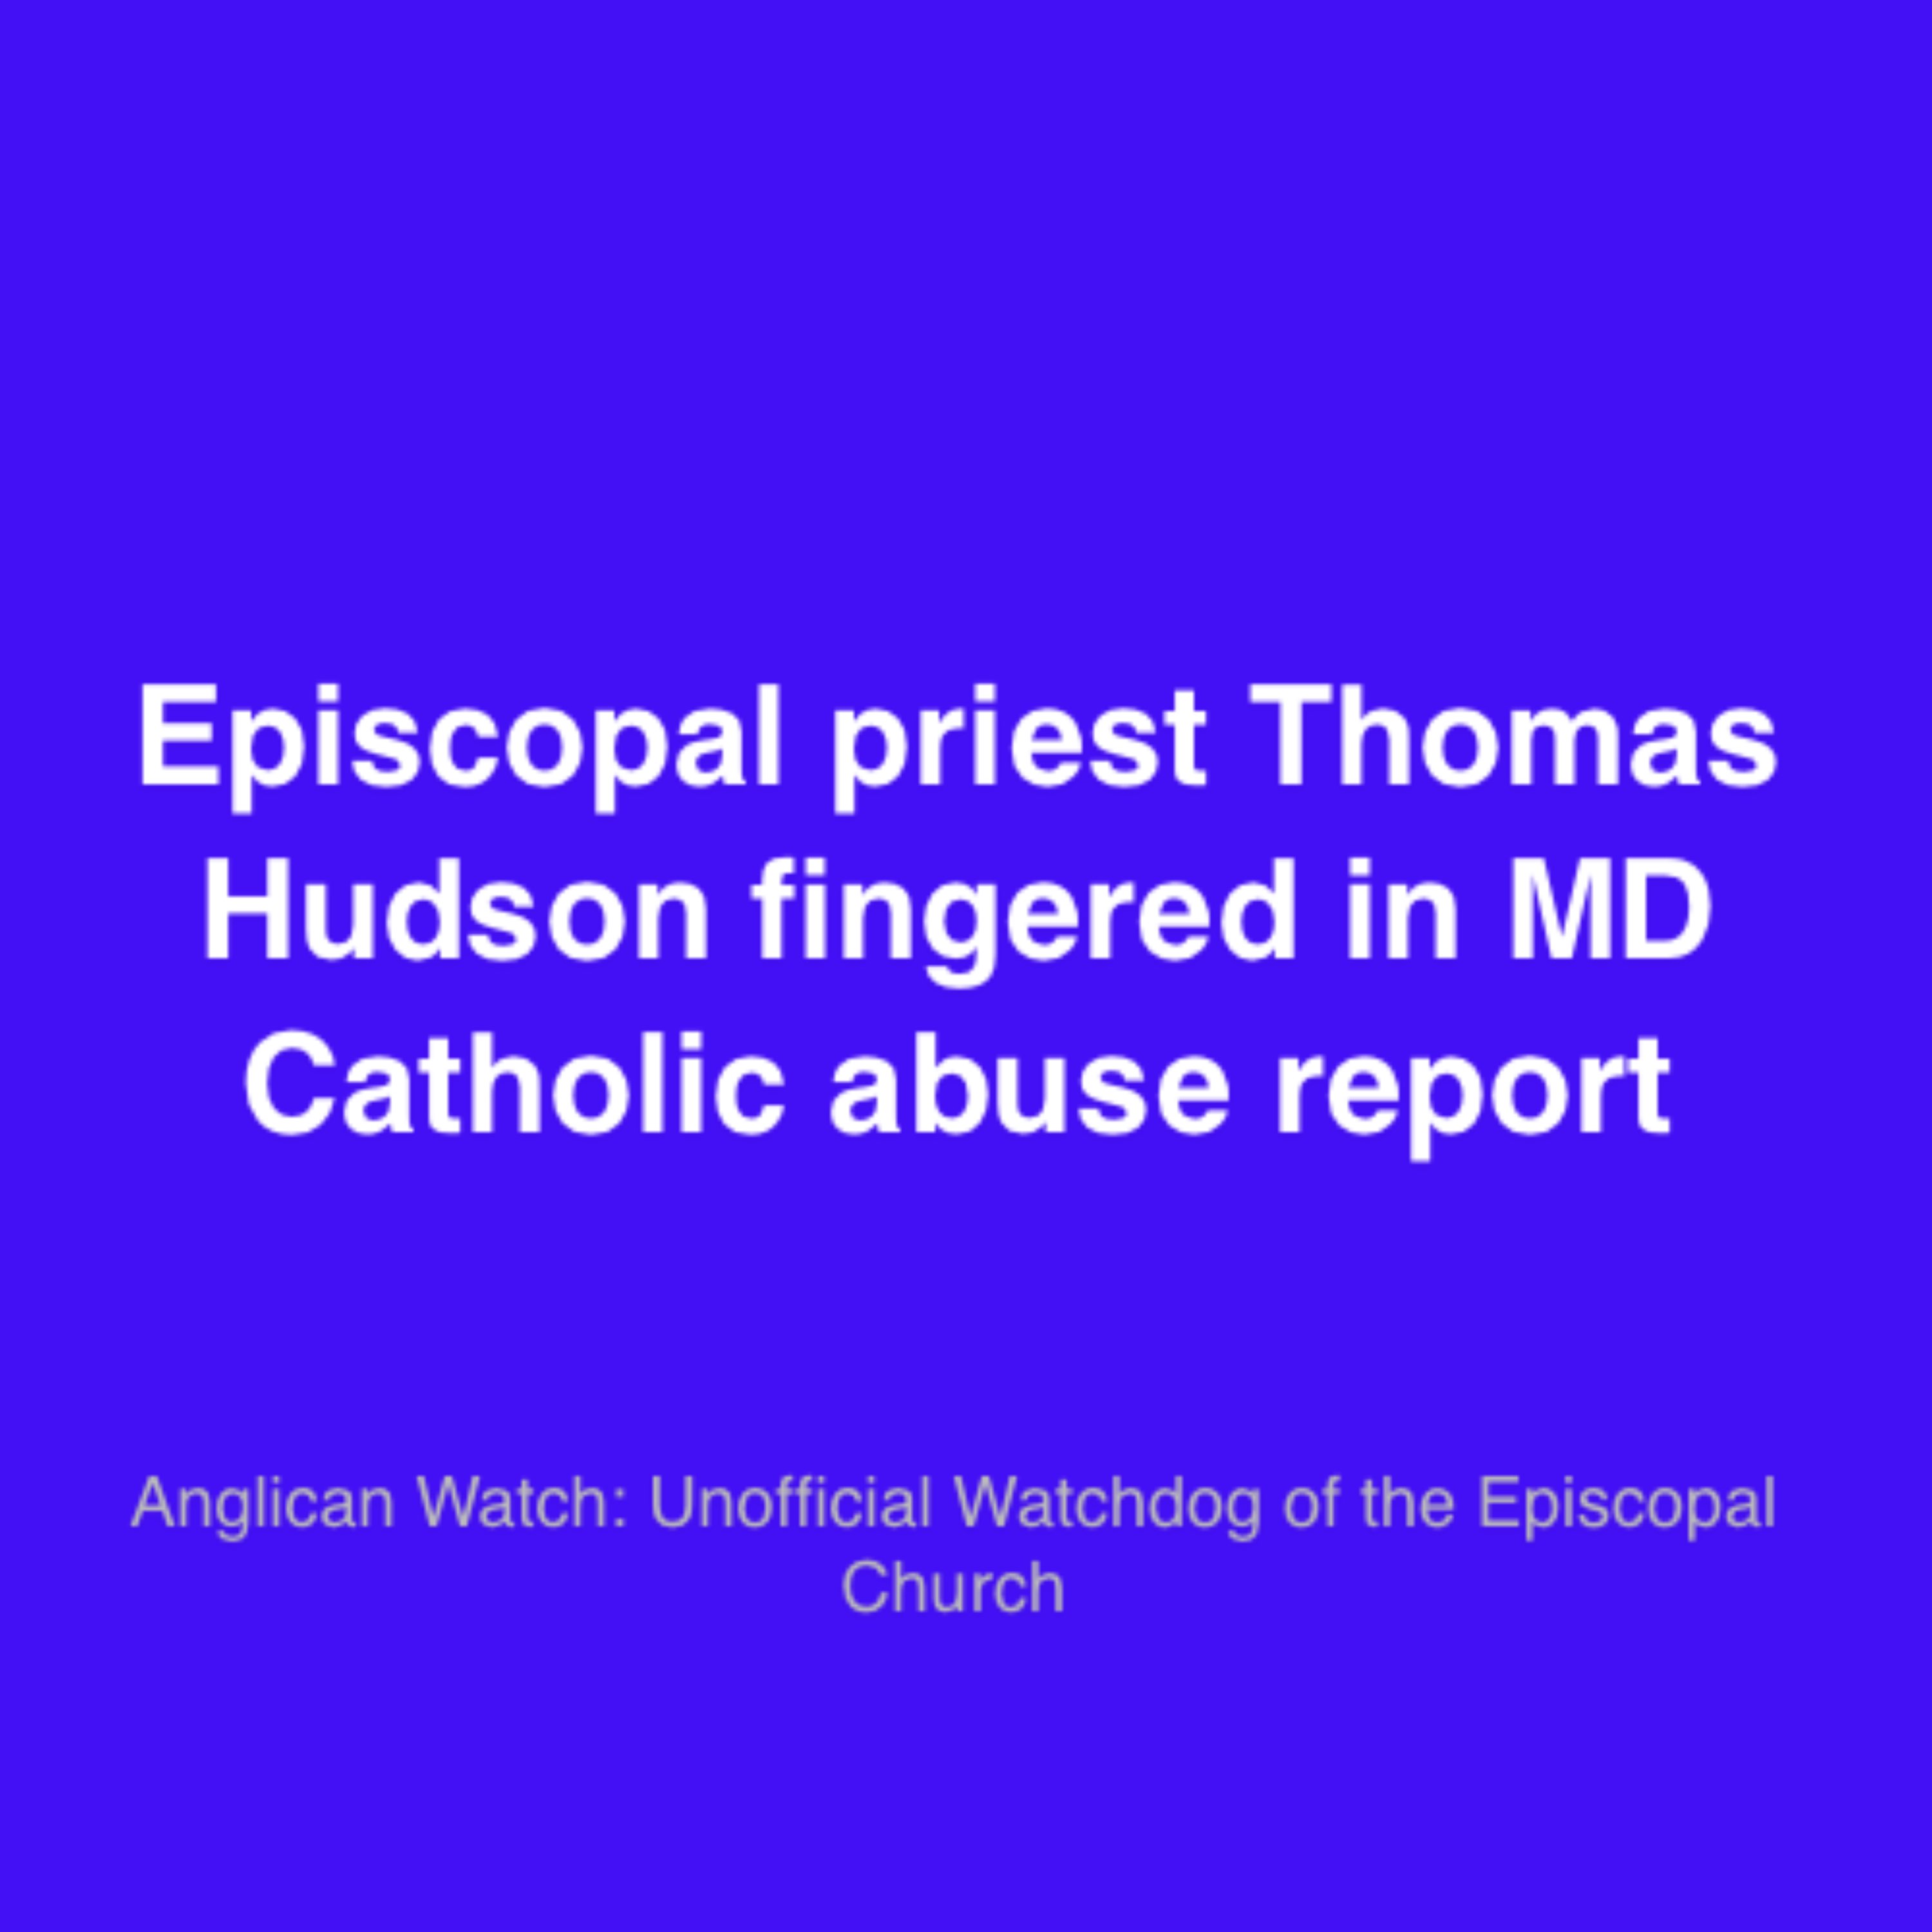 Episcopal priest Thomas Hudson fingered in MD Catholic abuse report